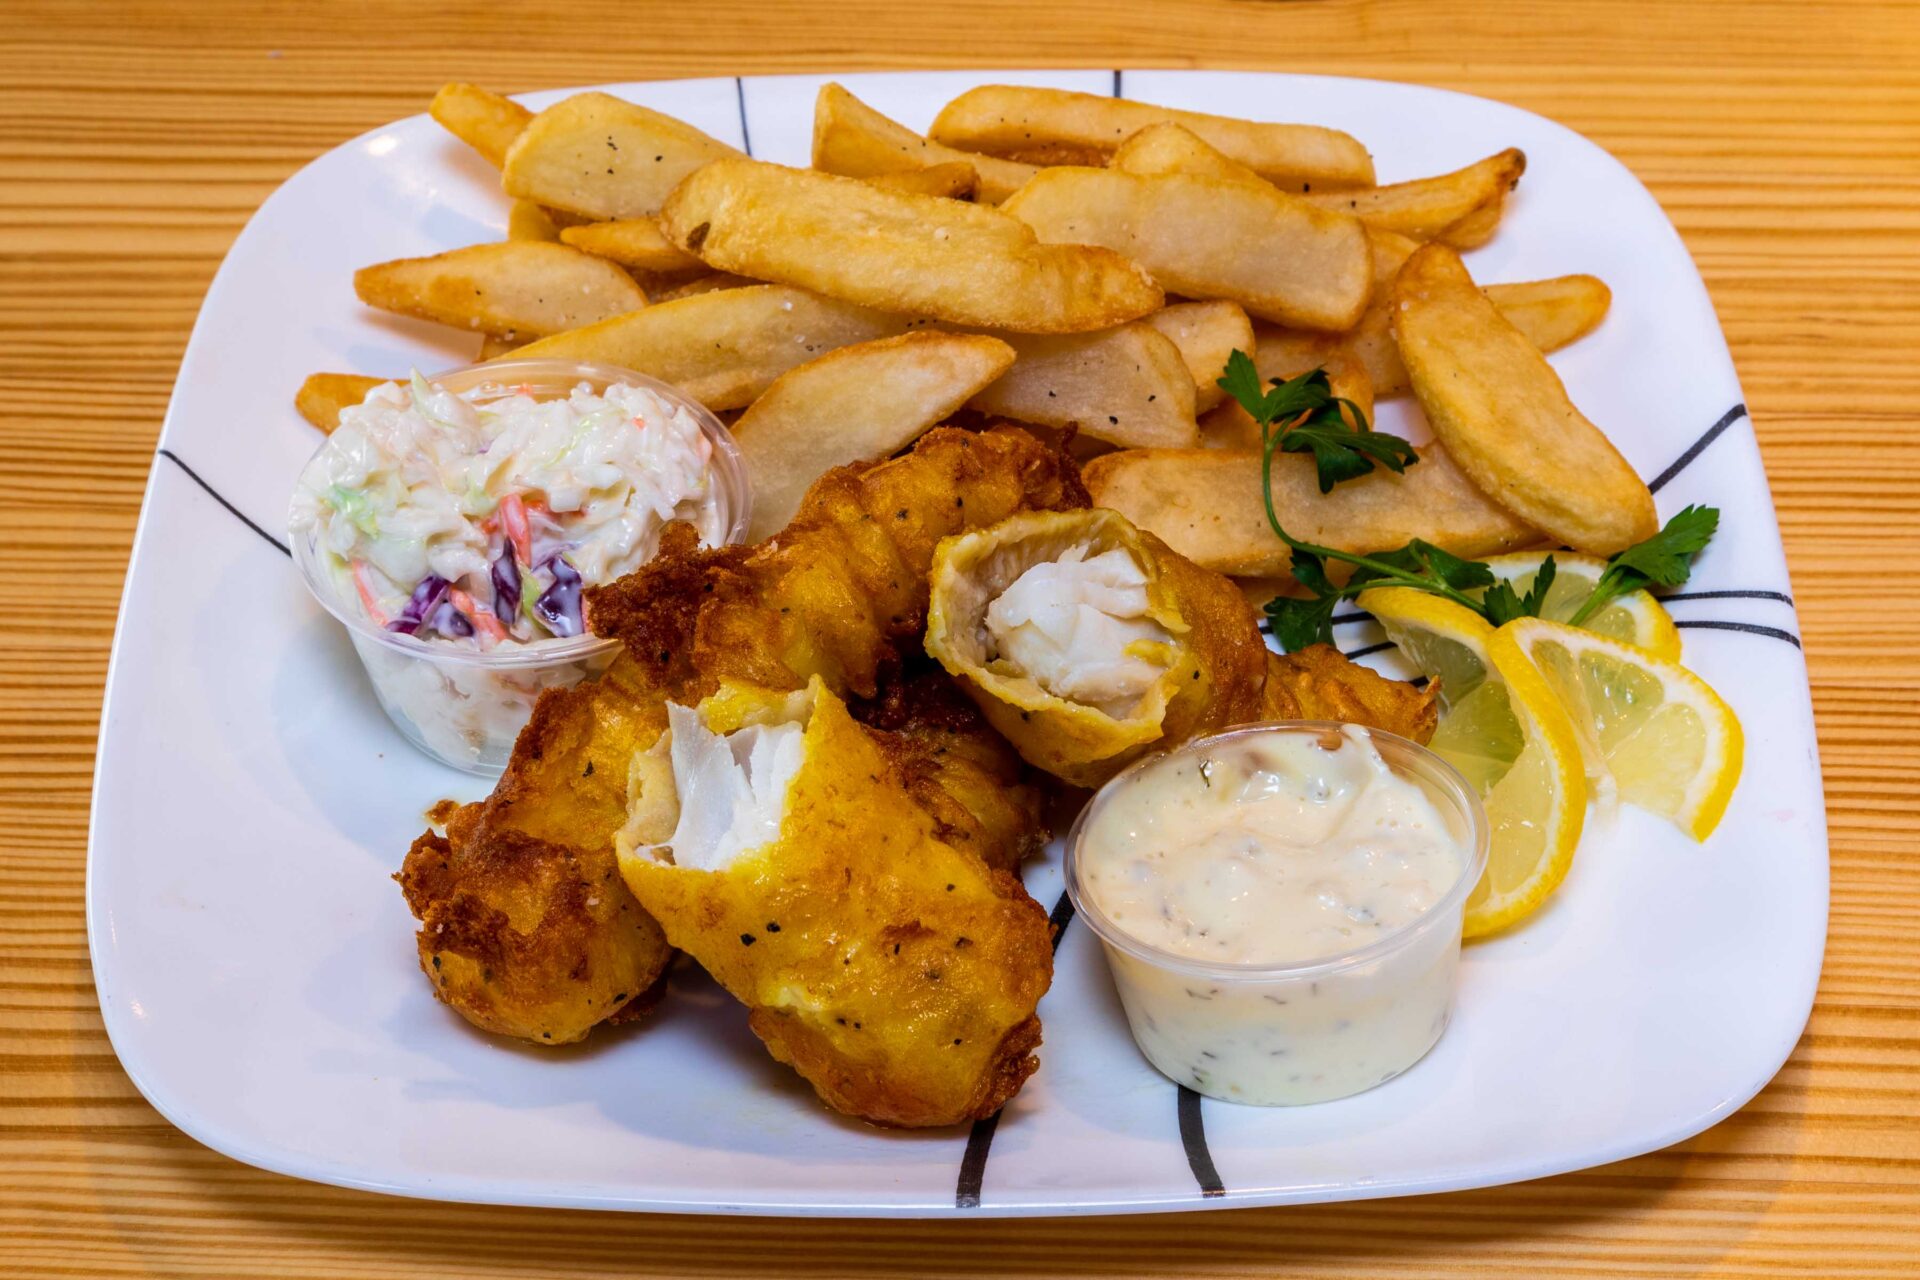 A plate of food with fish and fries on it.